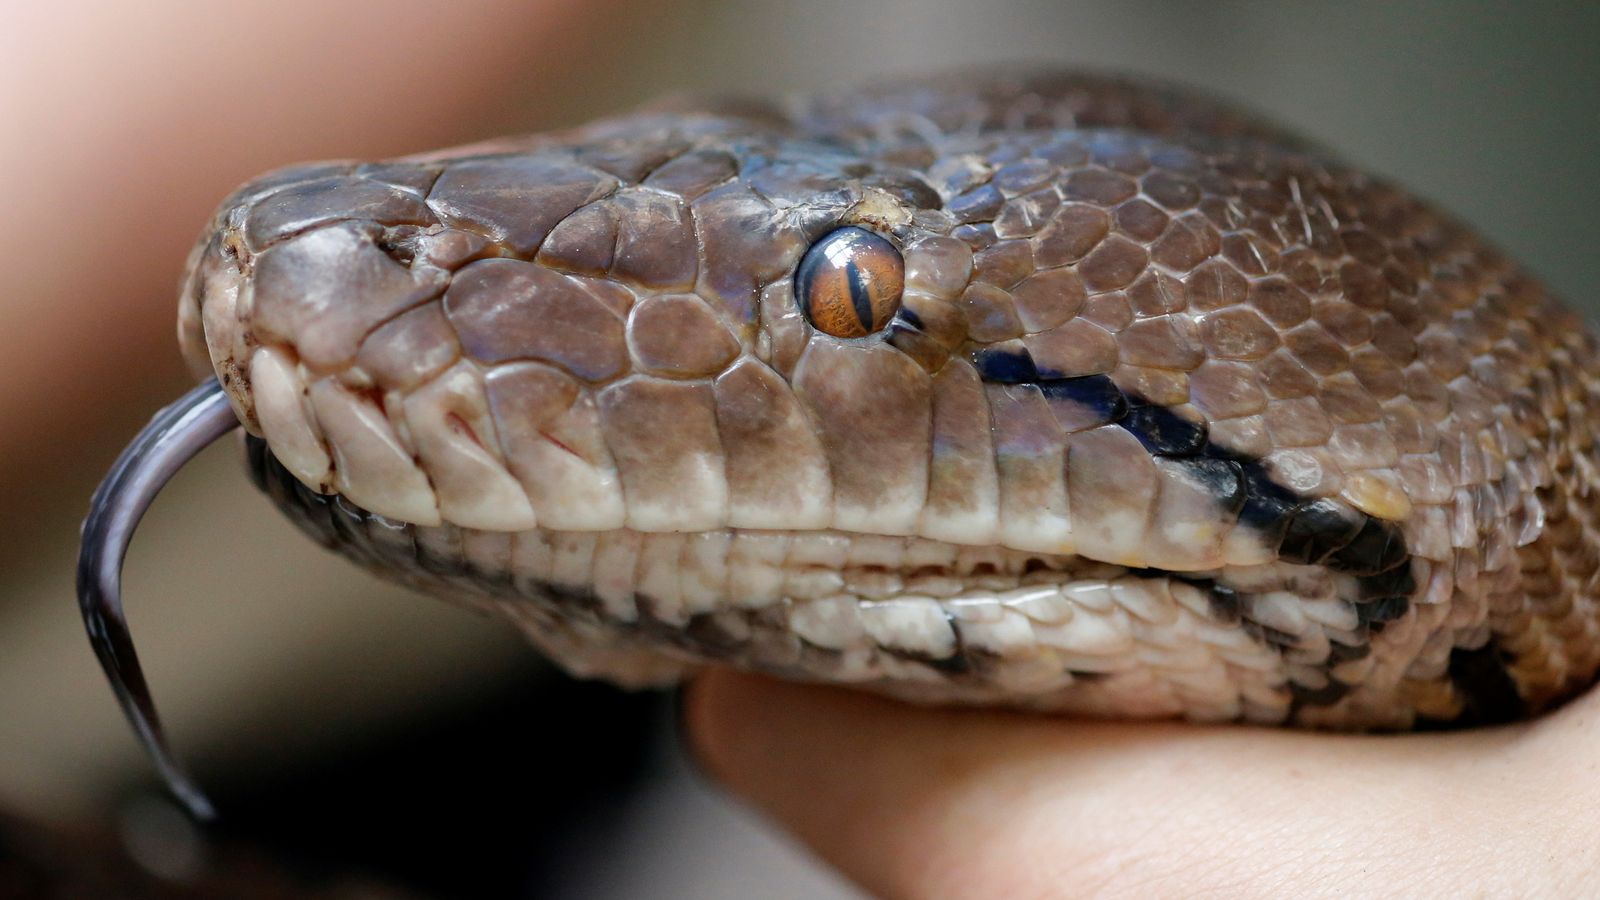 Woman eaten by 22-foot python in Indonesia  